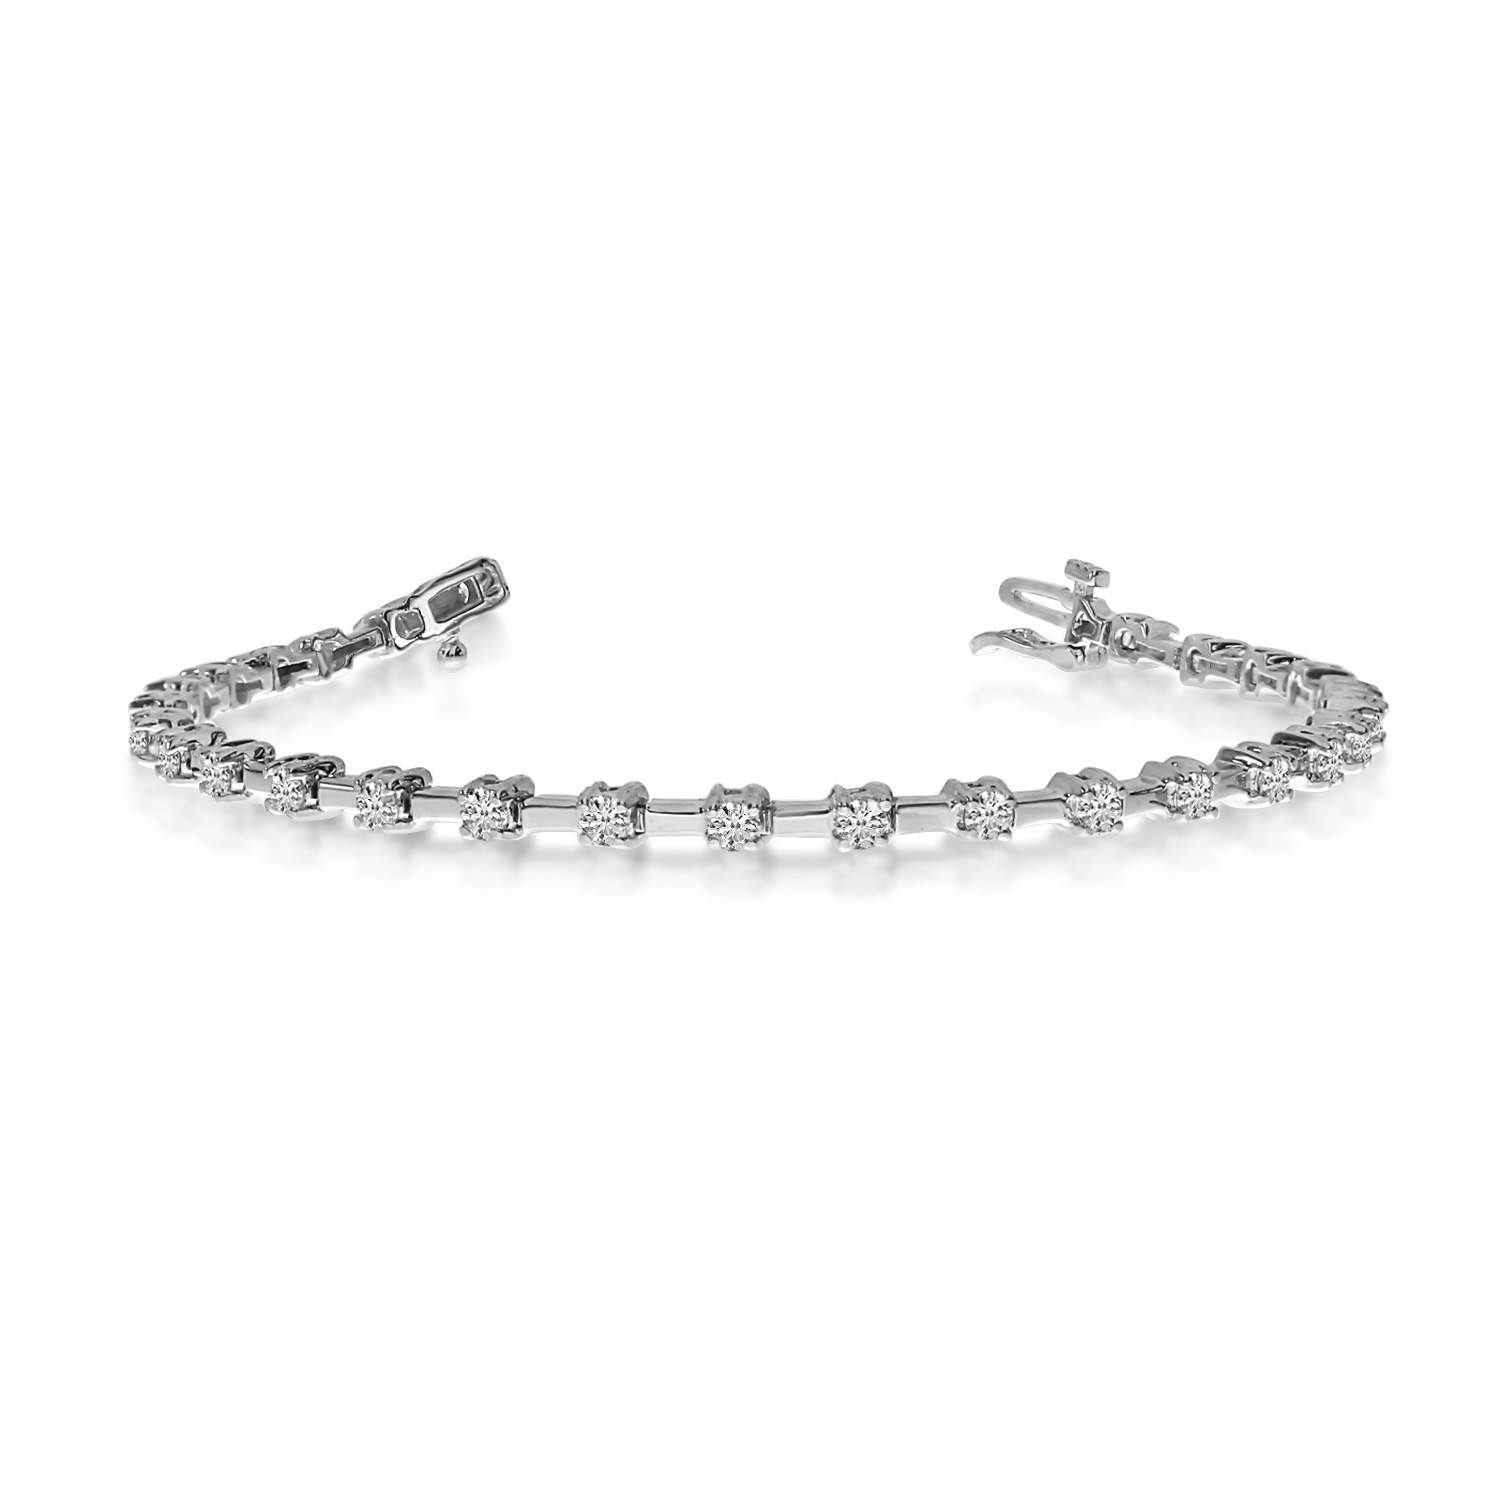 JCX3431: 14K solid white gold tennis bracelet with natural round diamonds.  3.00 carat total weight of diamonds.